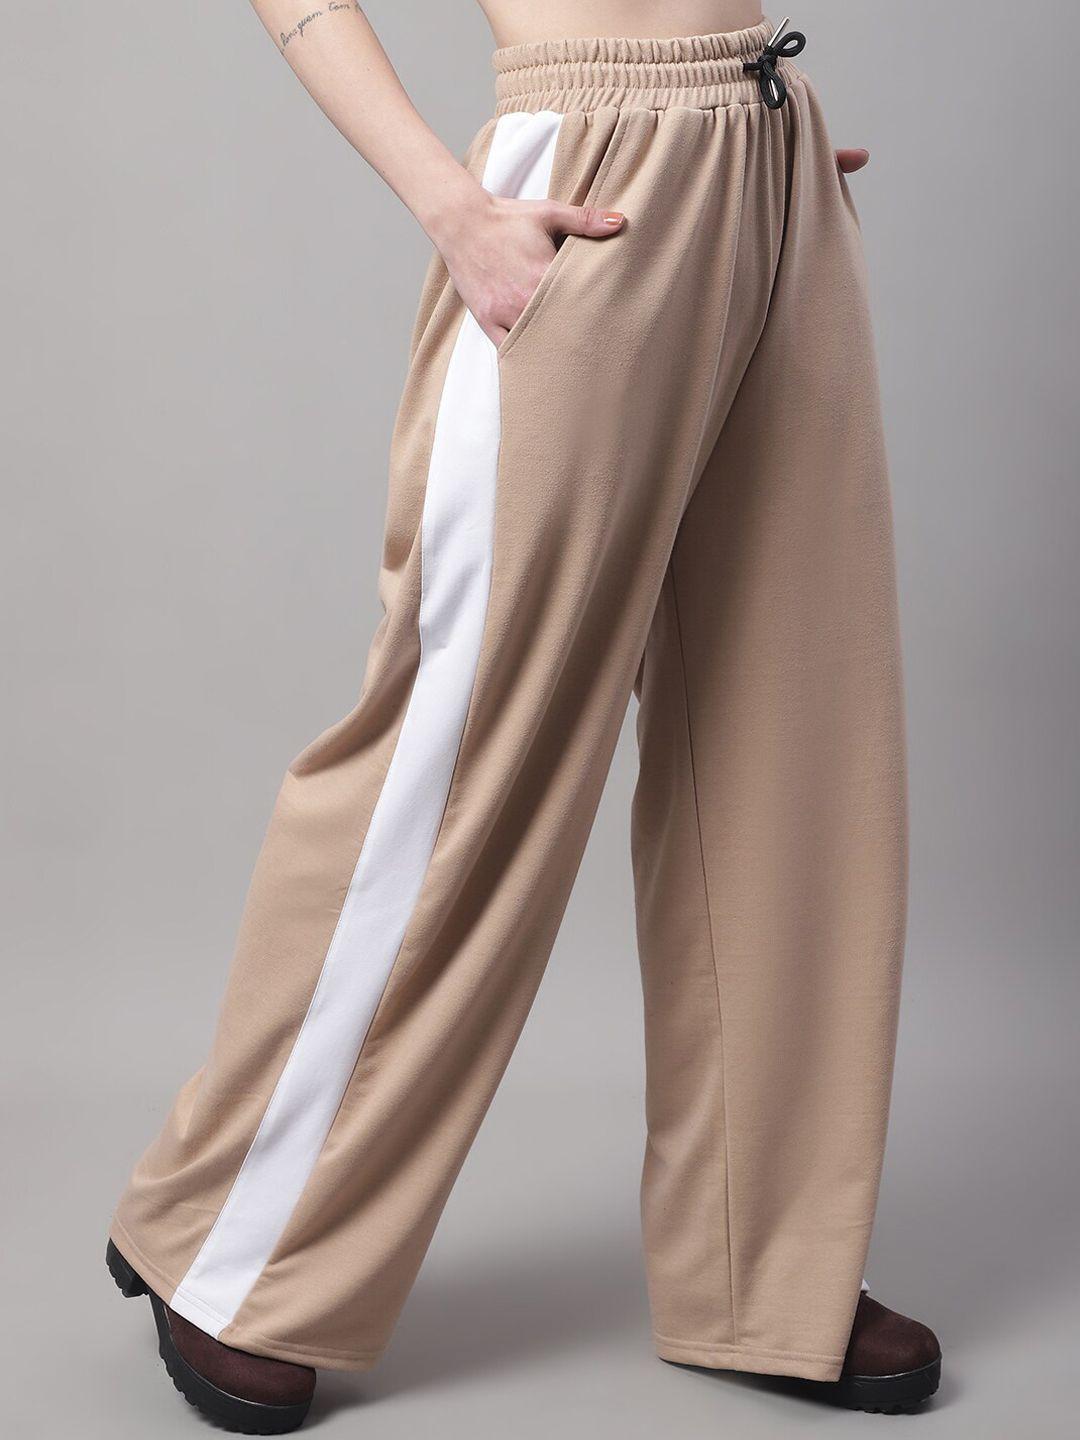 door74-women-colourblocked-cotton-relaxed-fit-track-pants